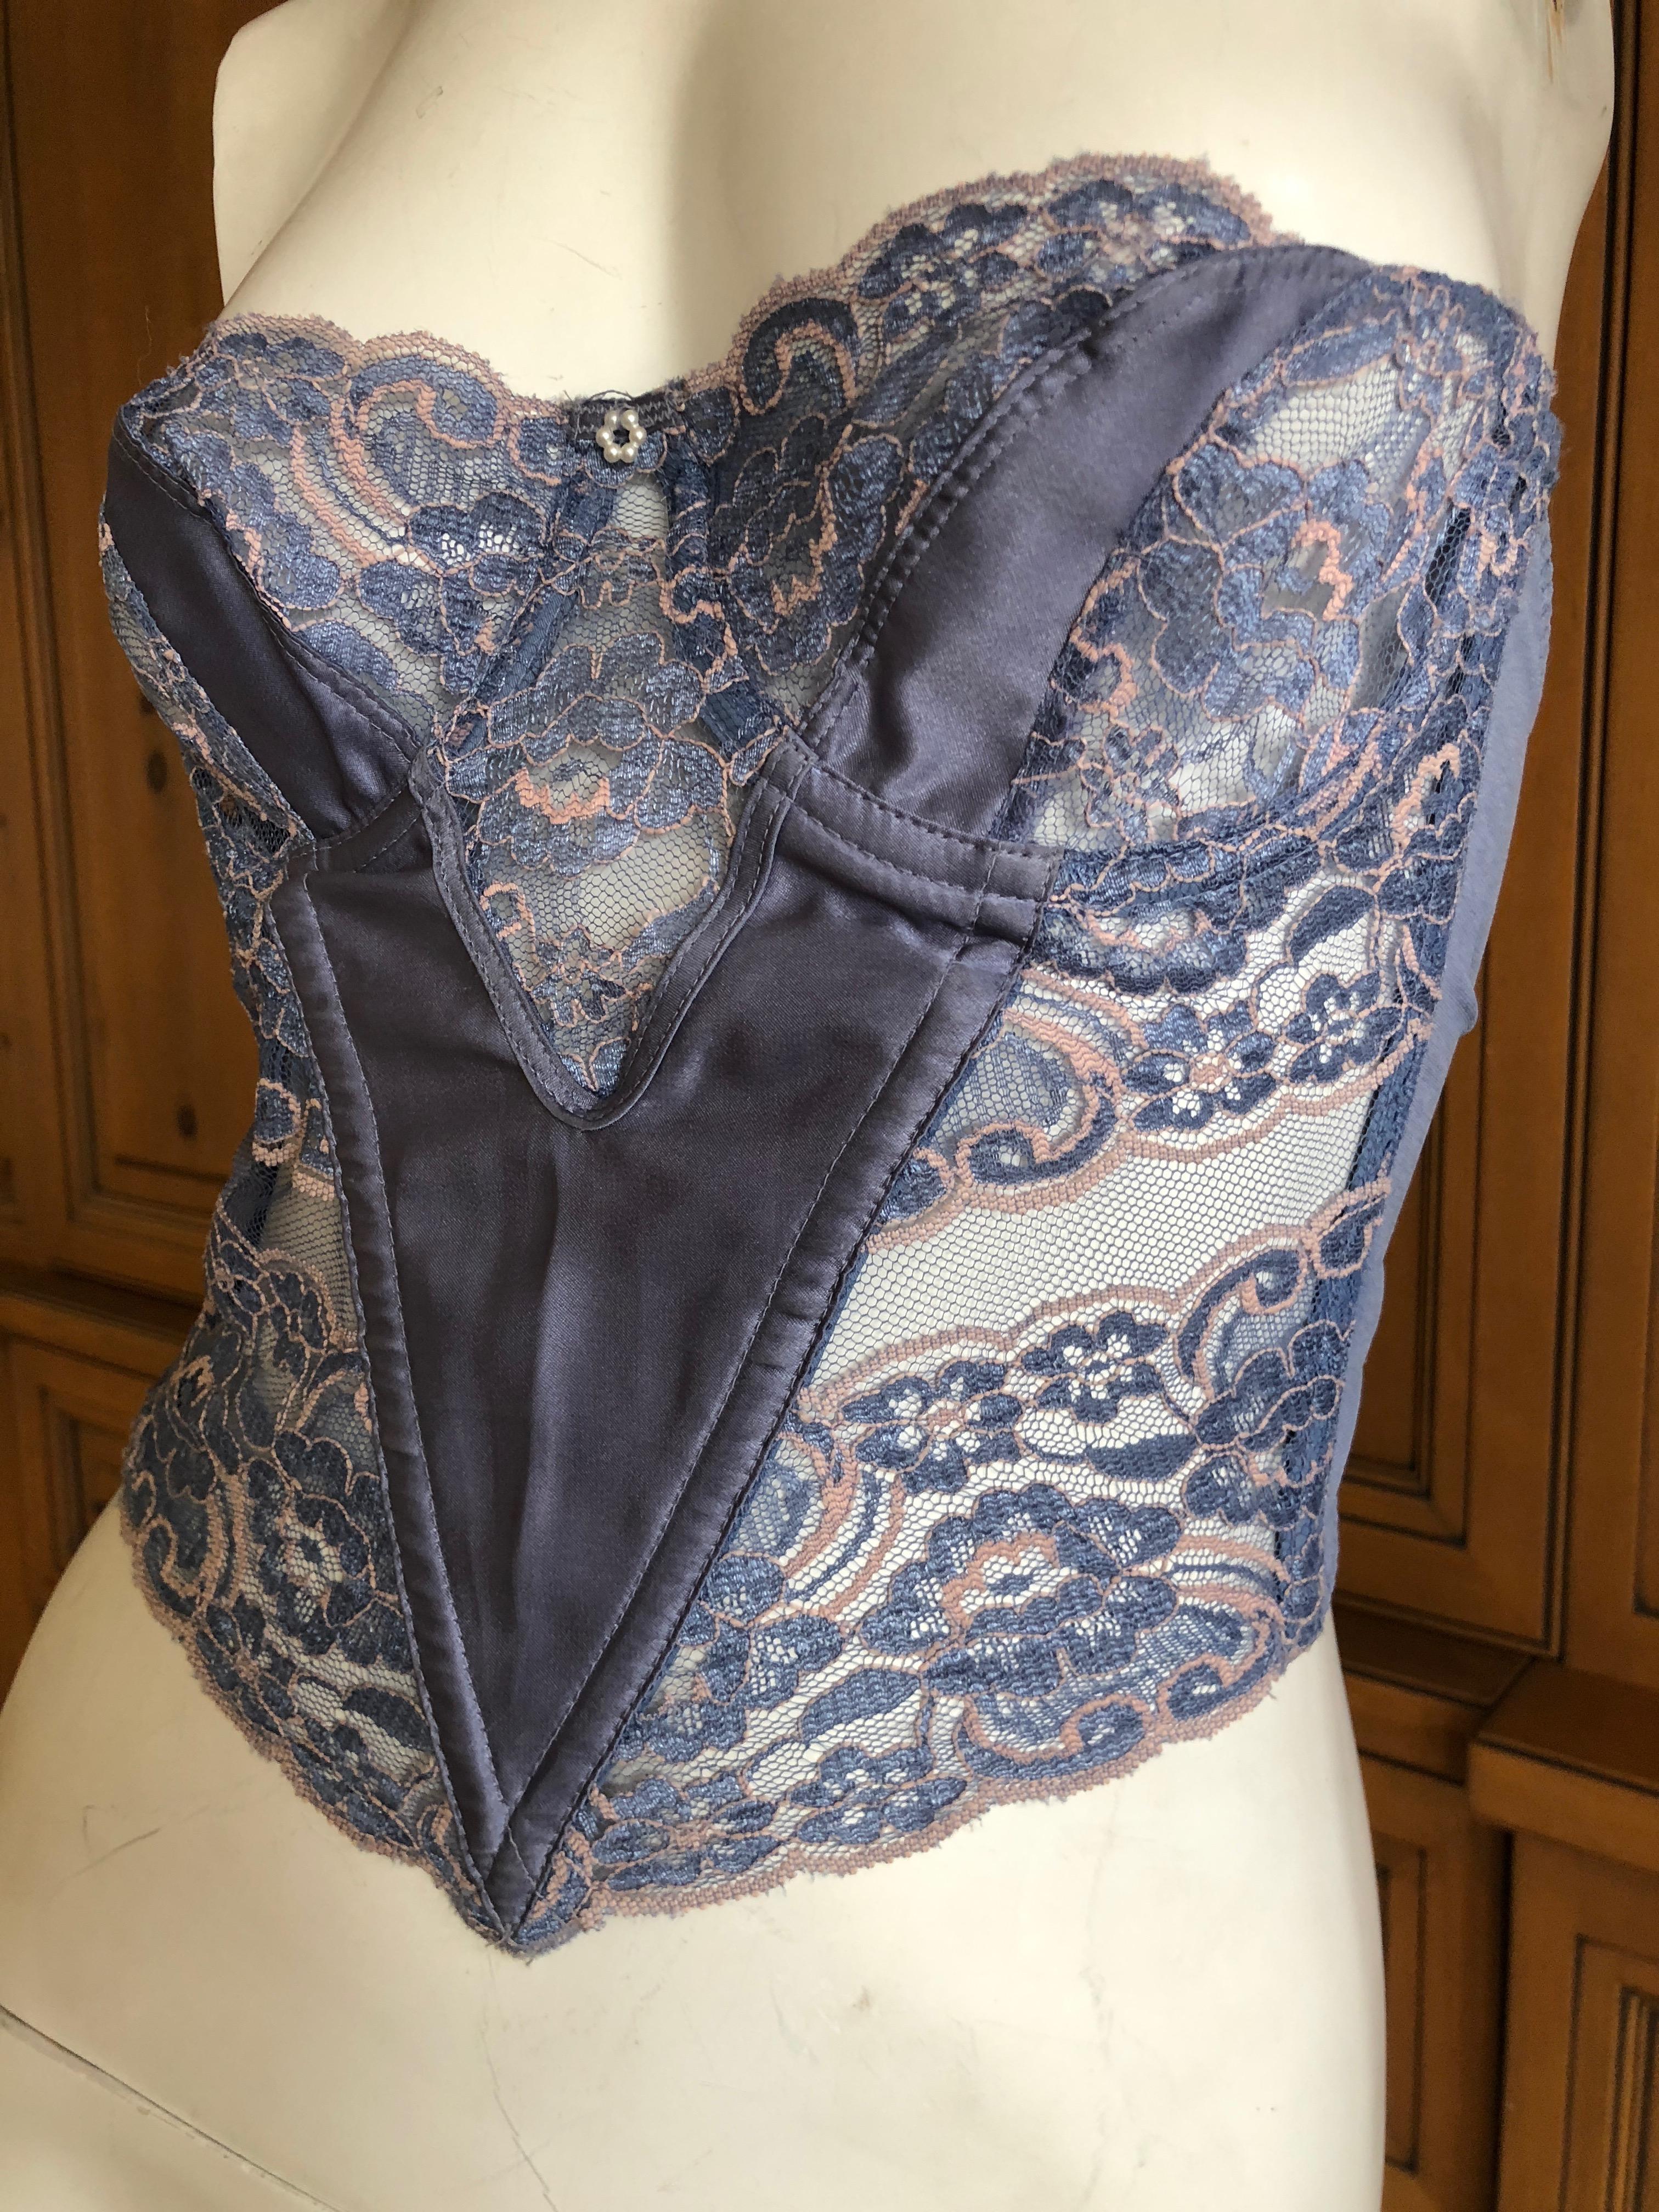 Wonderful vintage lace corset from Christian Dior 
Marked 34 B
Bust 27